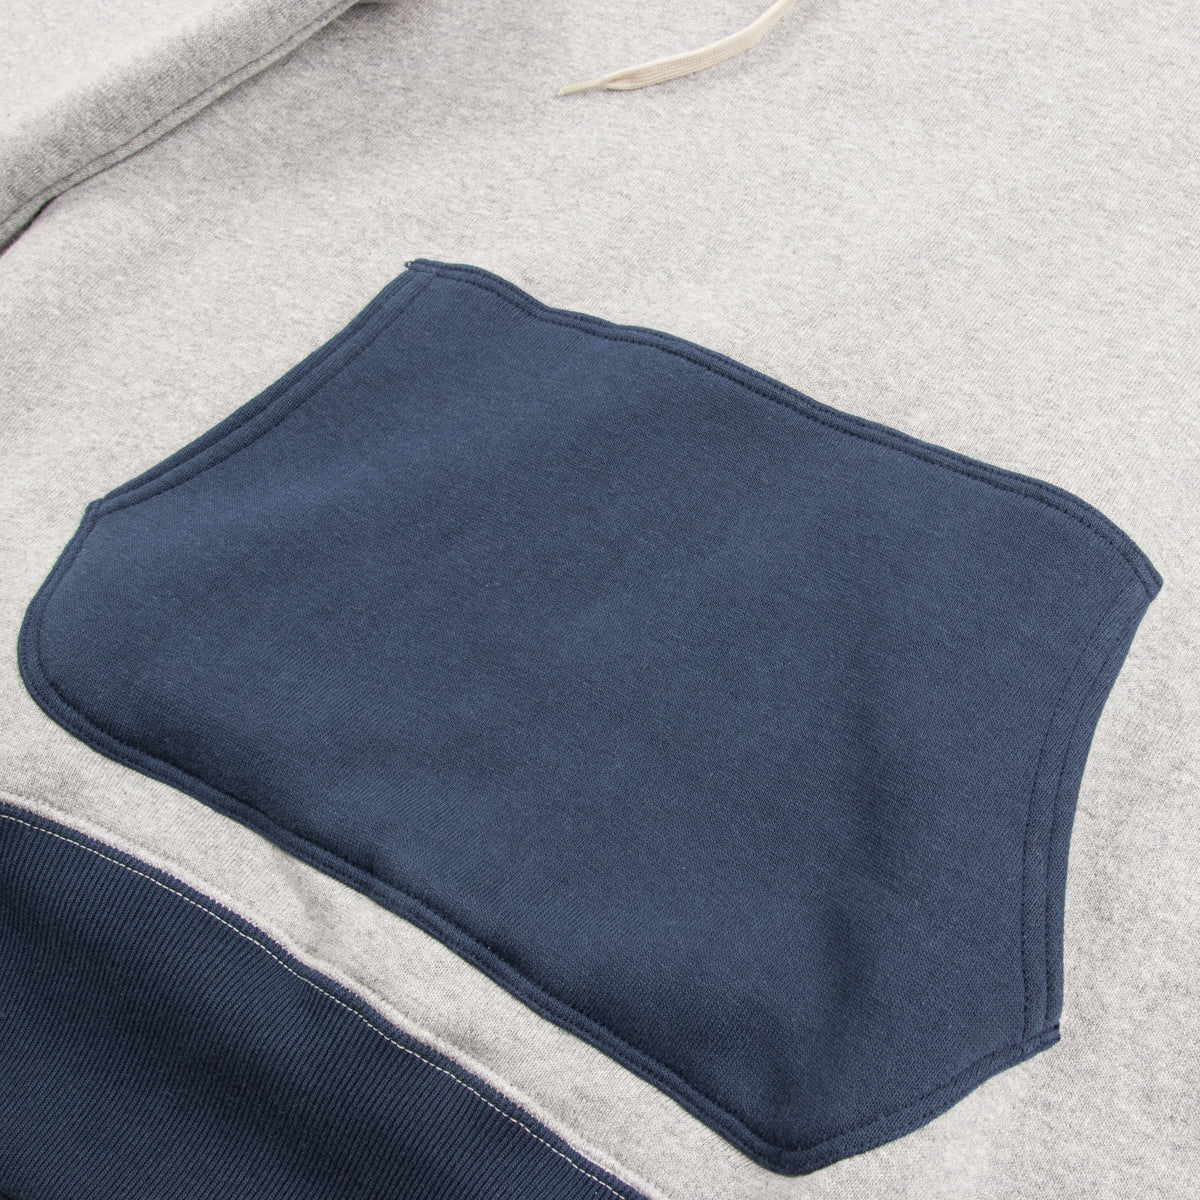 The Real McCoy's Double Face After-Hooded Sweatshirt - Gray/Navy Small